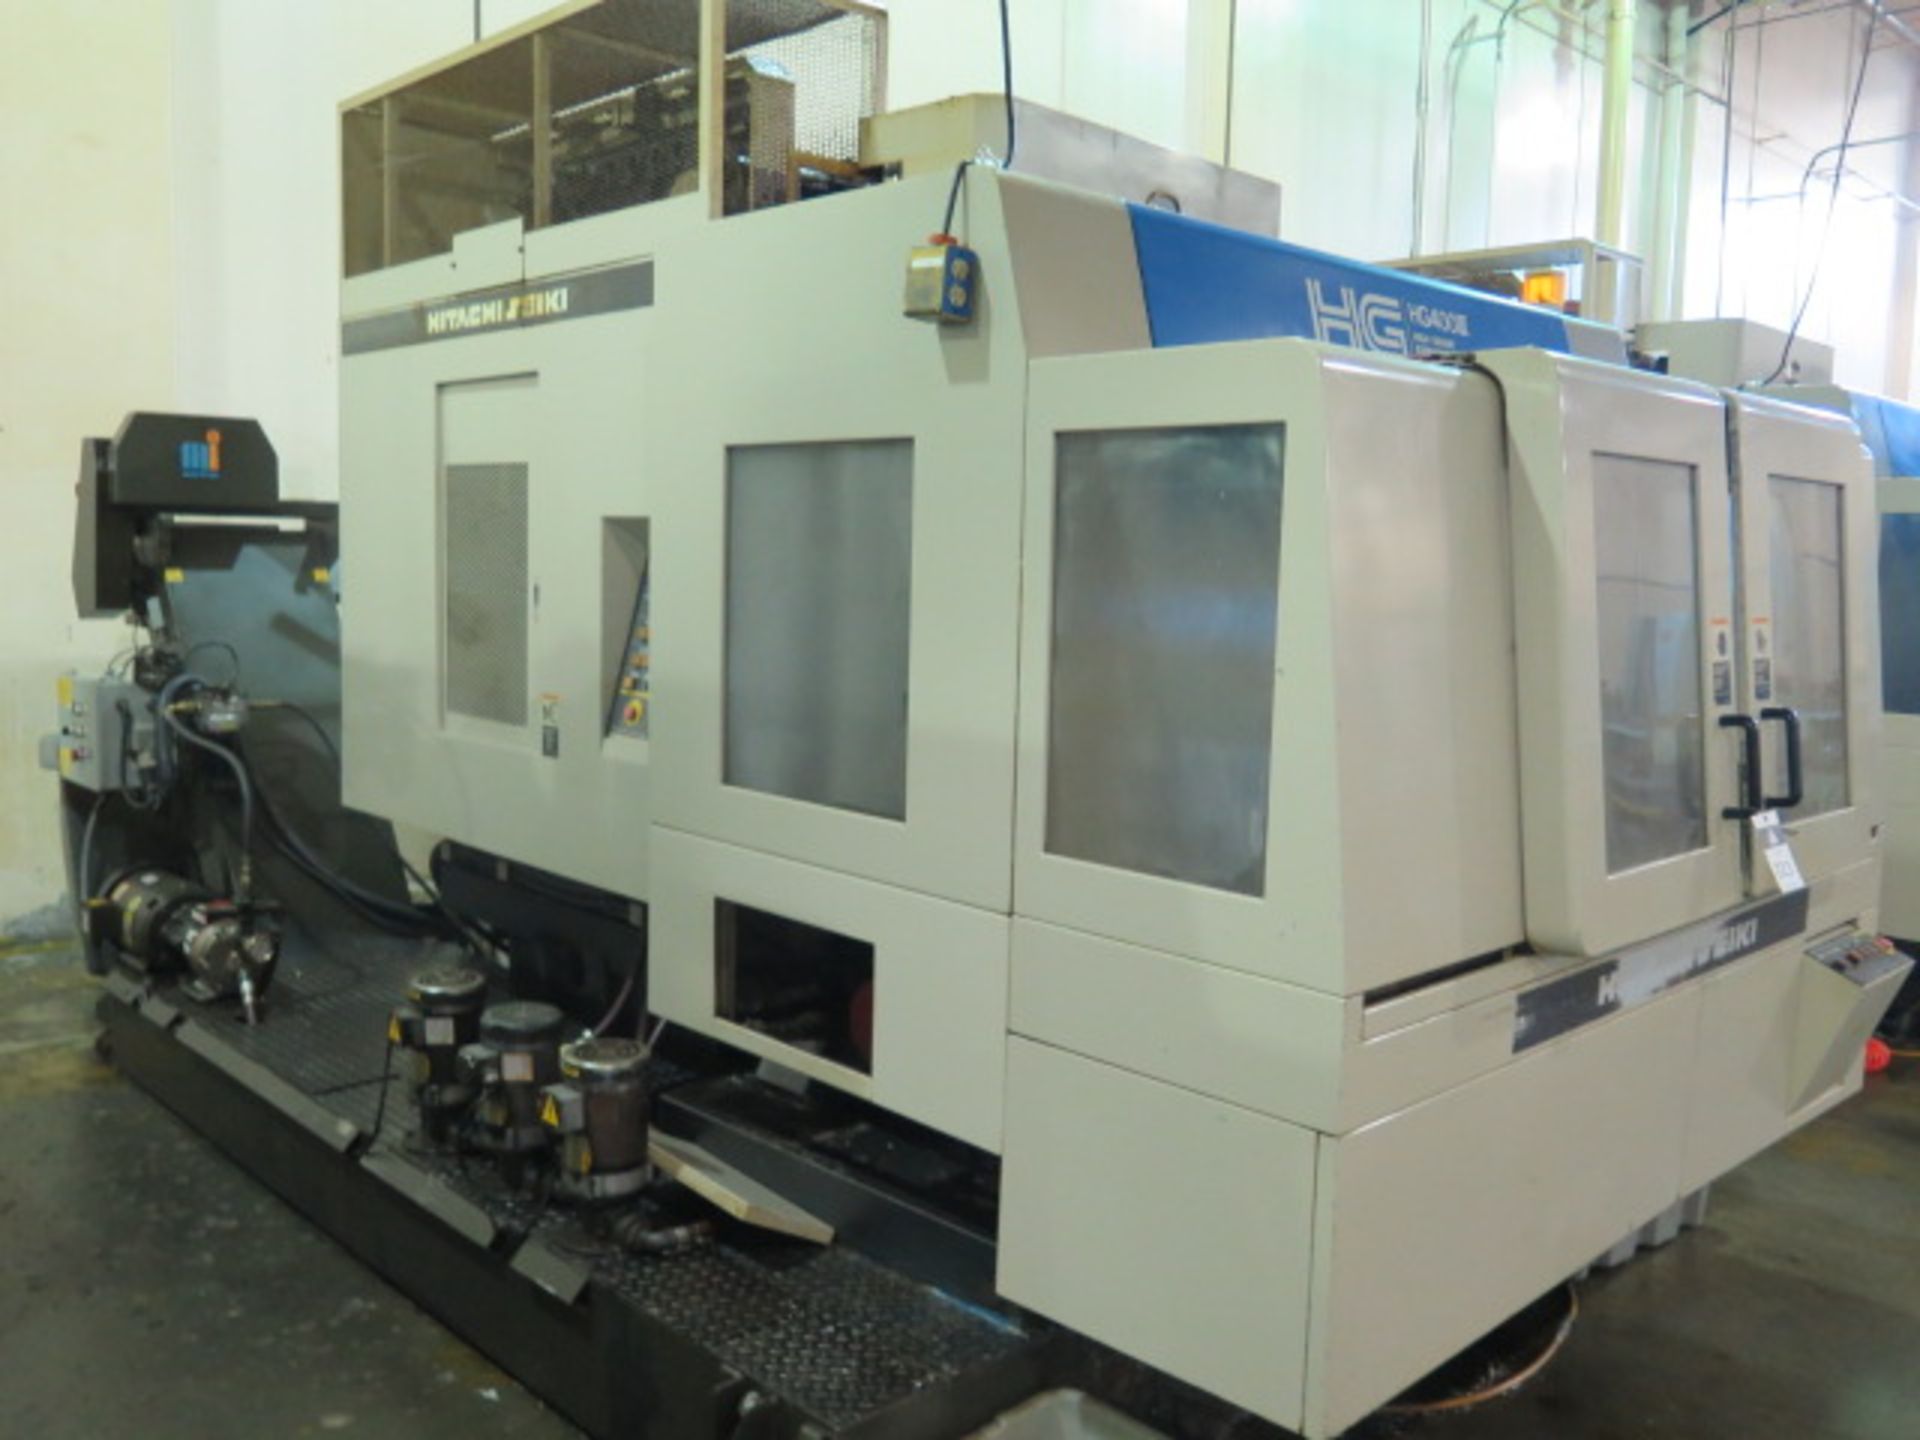 Hitachi Seiki HG400 III 2-Pallet 4-Axis CNC Horizontal Machining Center s/n HG43648 w/ SOLD AS IS - Image 18 of 26